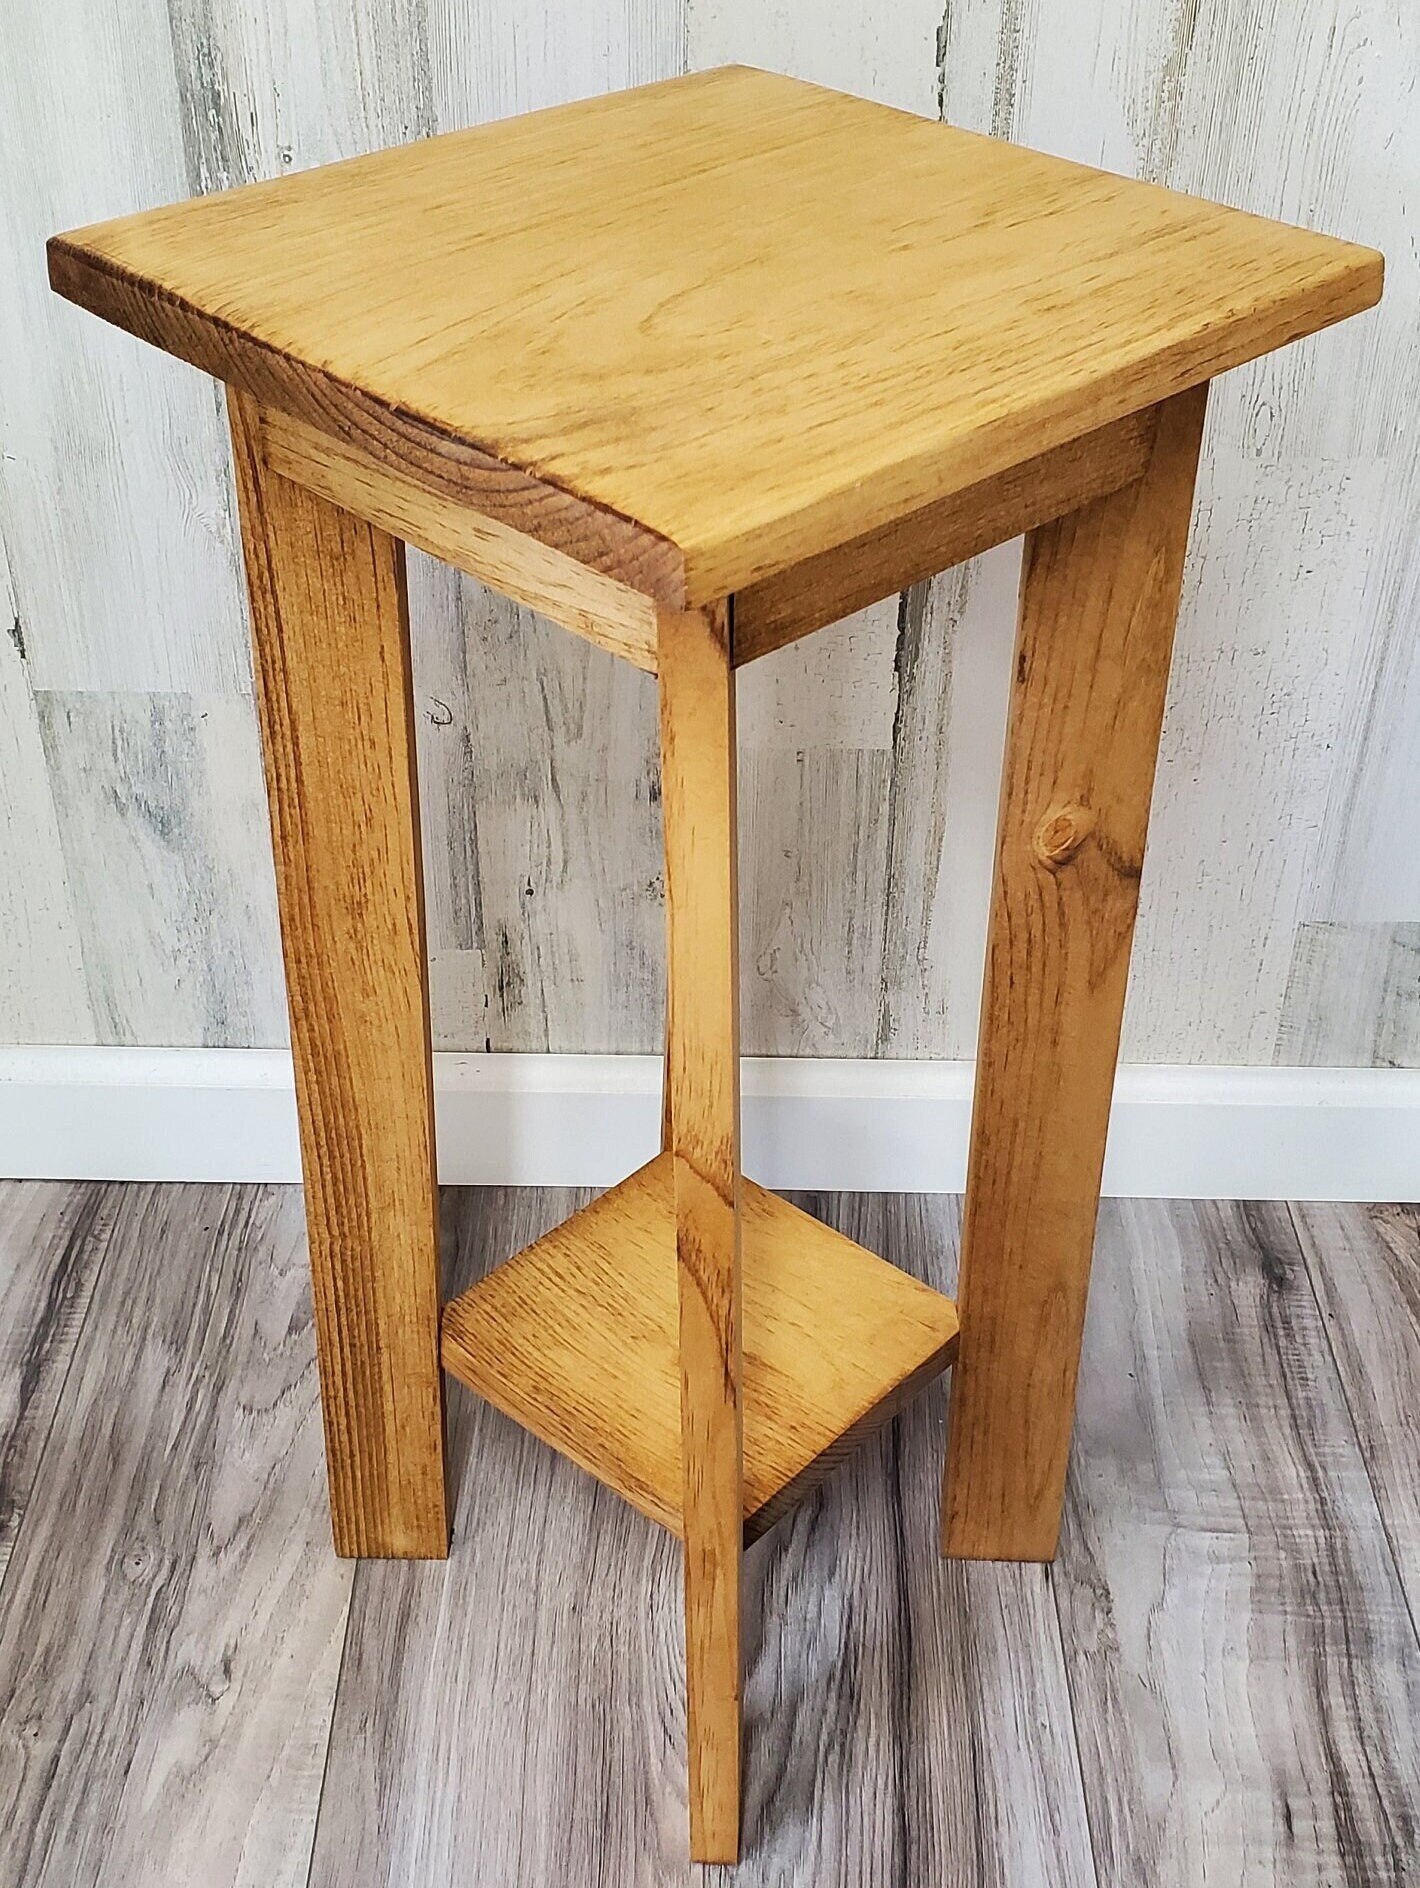 Fully Assembled Golden Oak Knotty Pine End Table, Entryway Table, Small  Side Table, Bedside Table, Phone Table,furniture for Small Area 